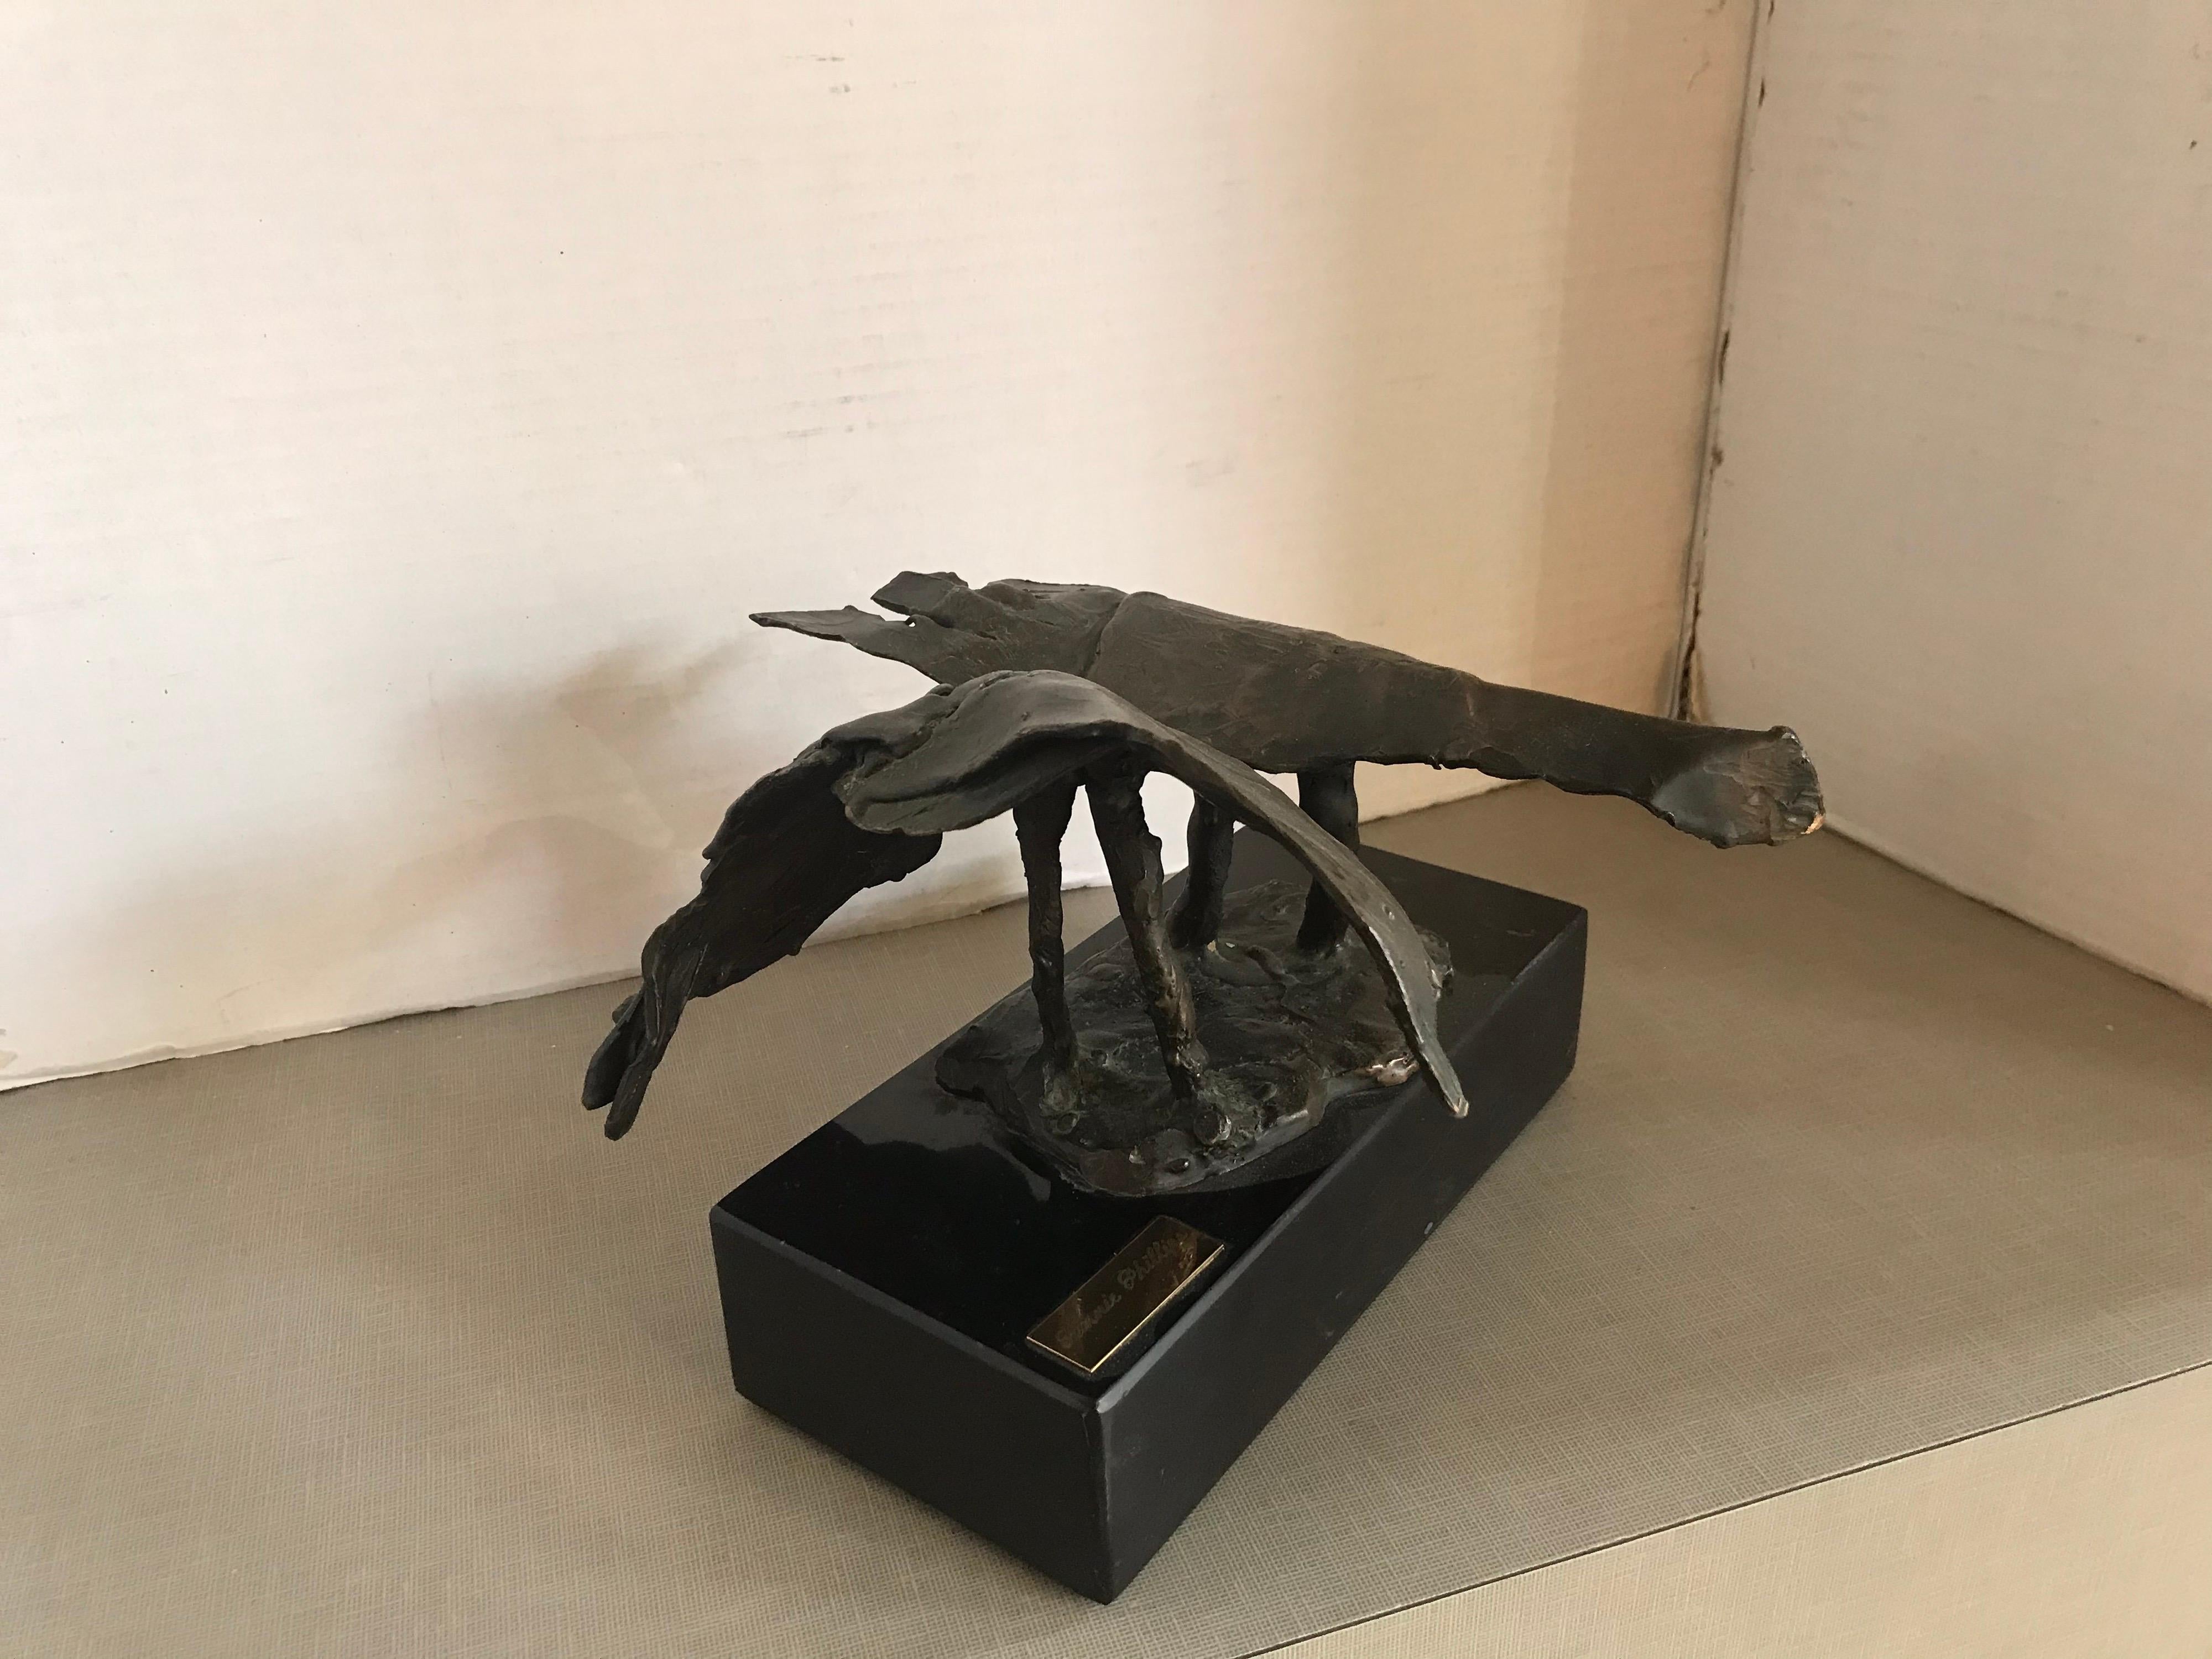 This is a heavy abstract bronze? Metal sculpture of a pair of birds by Fannie Phillips and inscribed on brass plate on stone plynth.